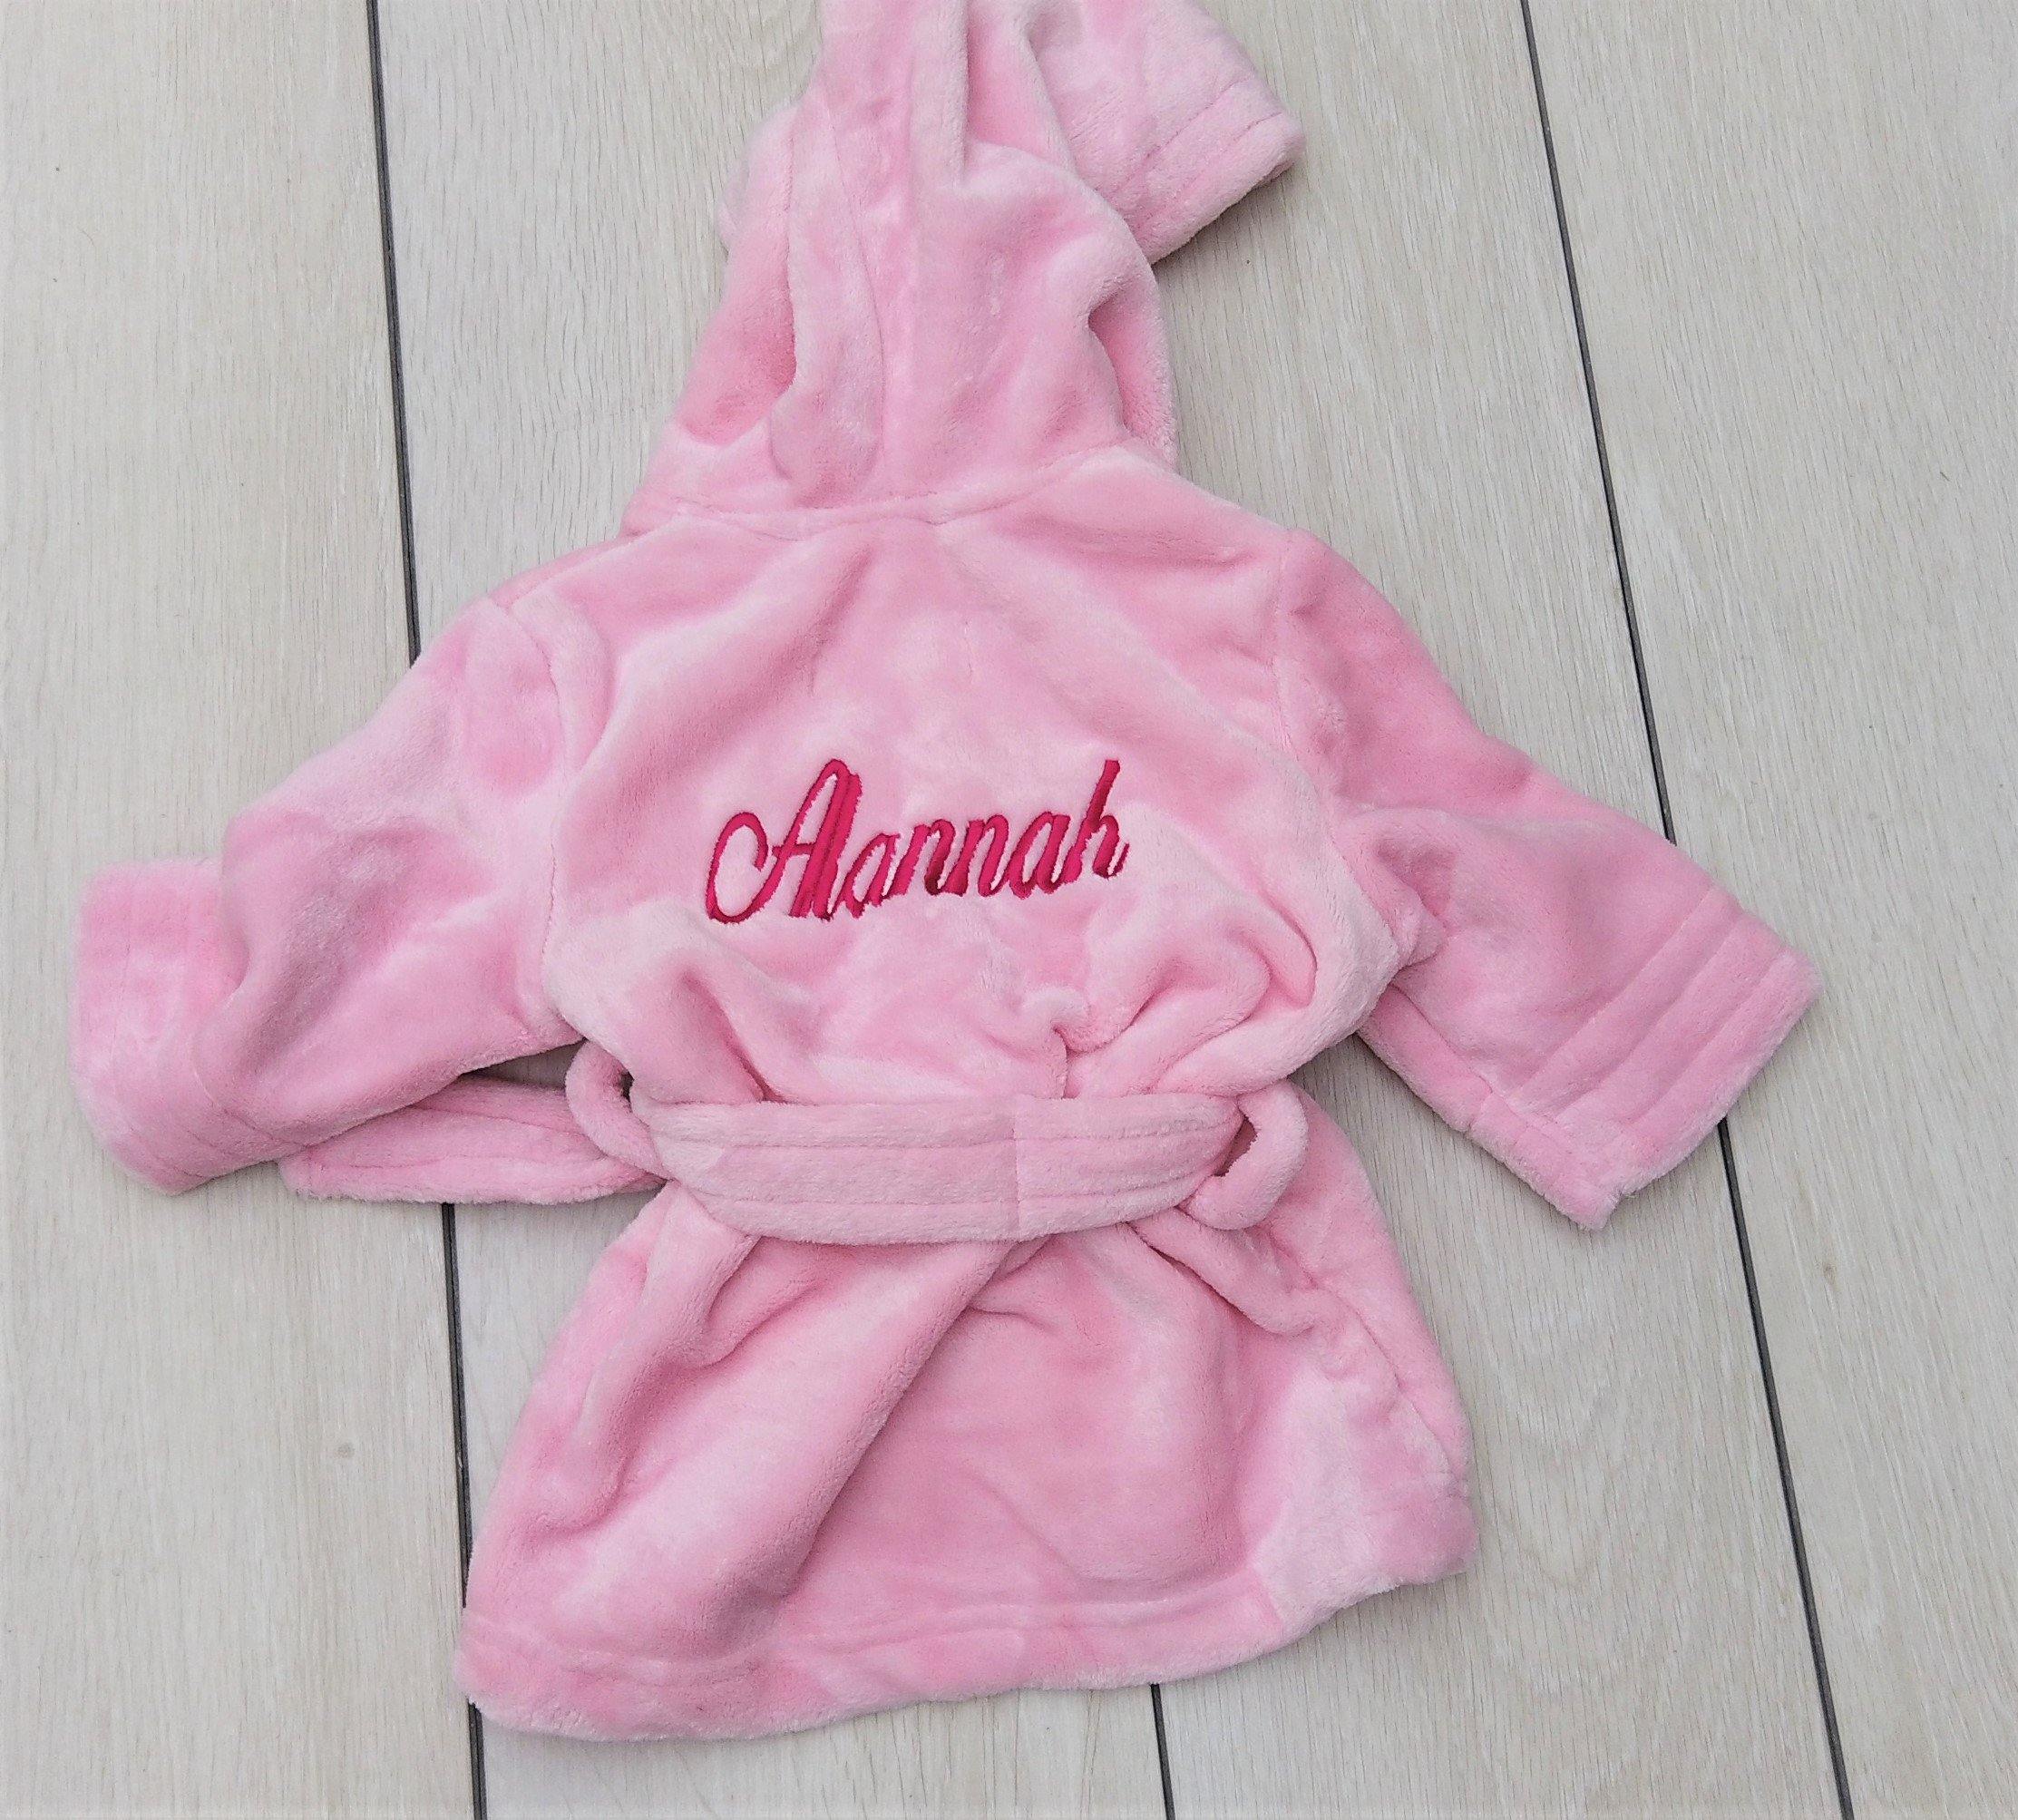 Personalised pink children's robe- Ireland -Robes4you